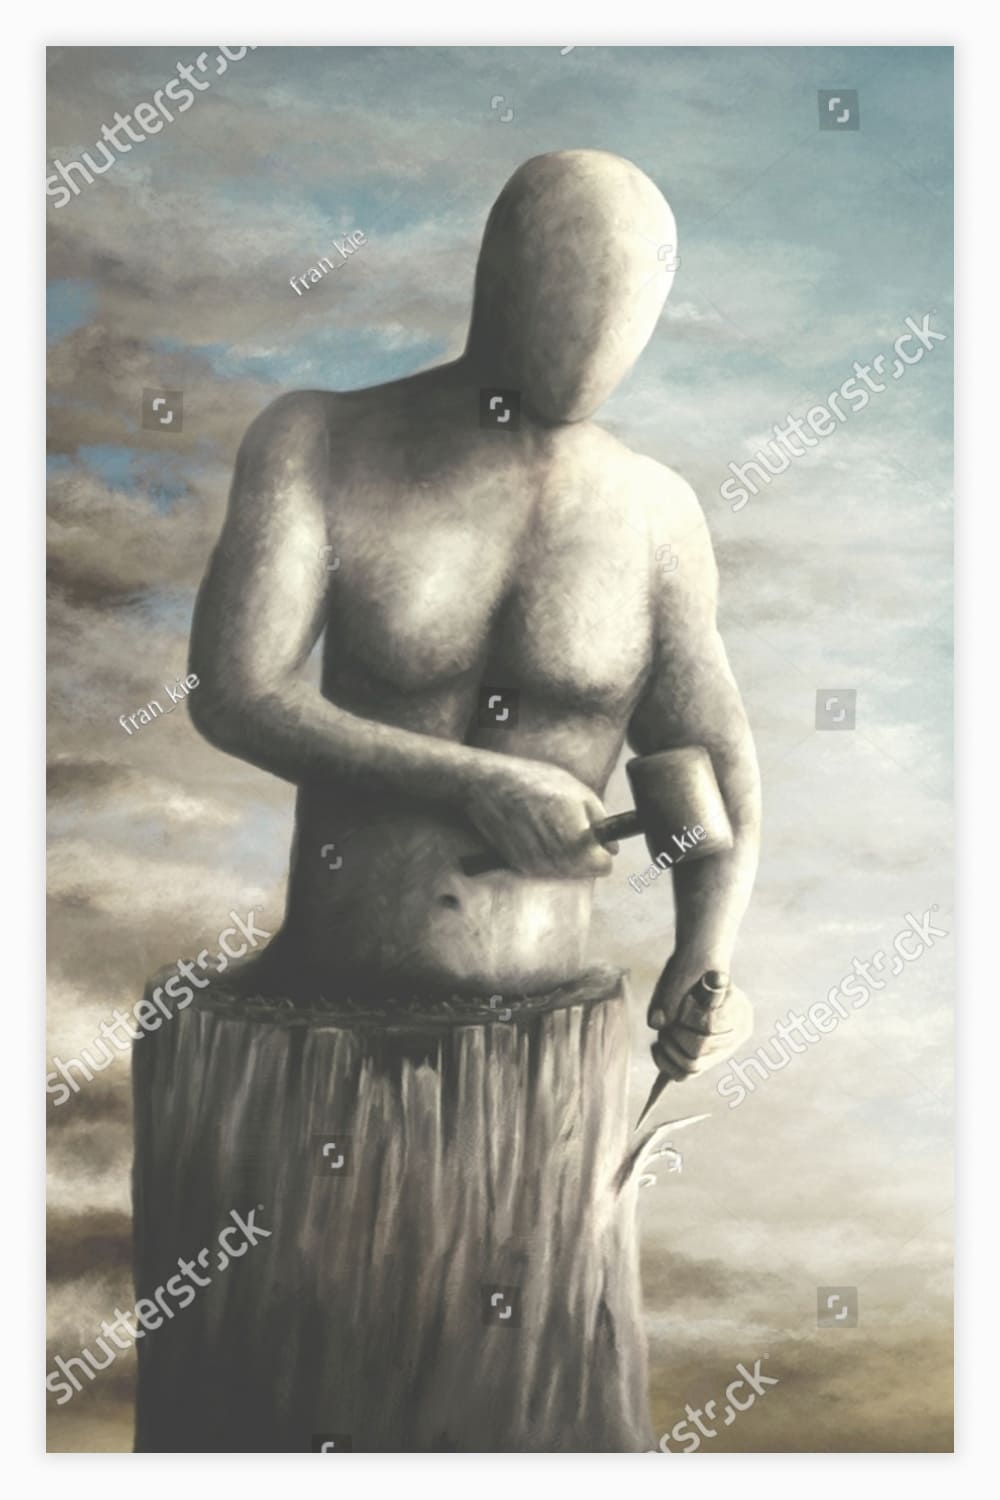 Illustration of man sculpting himself in the wood, surreal identity abstract new life concept.